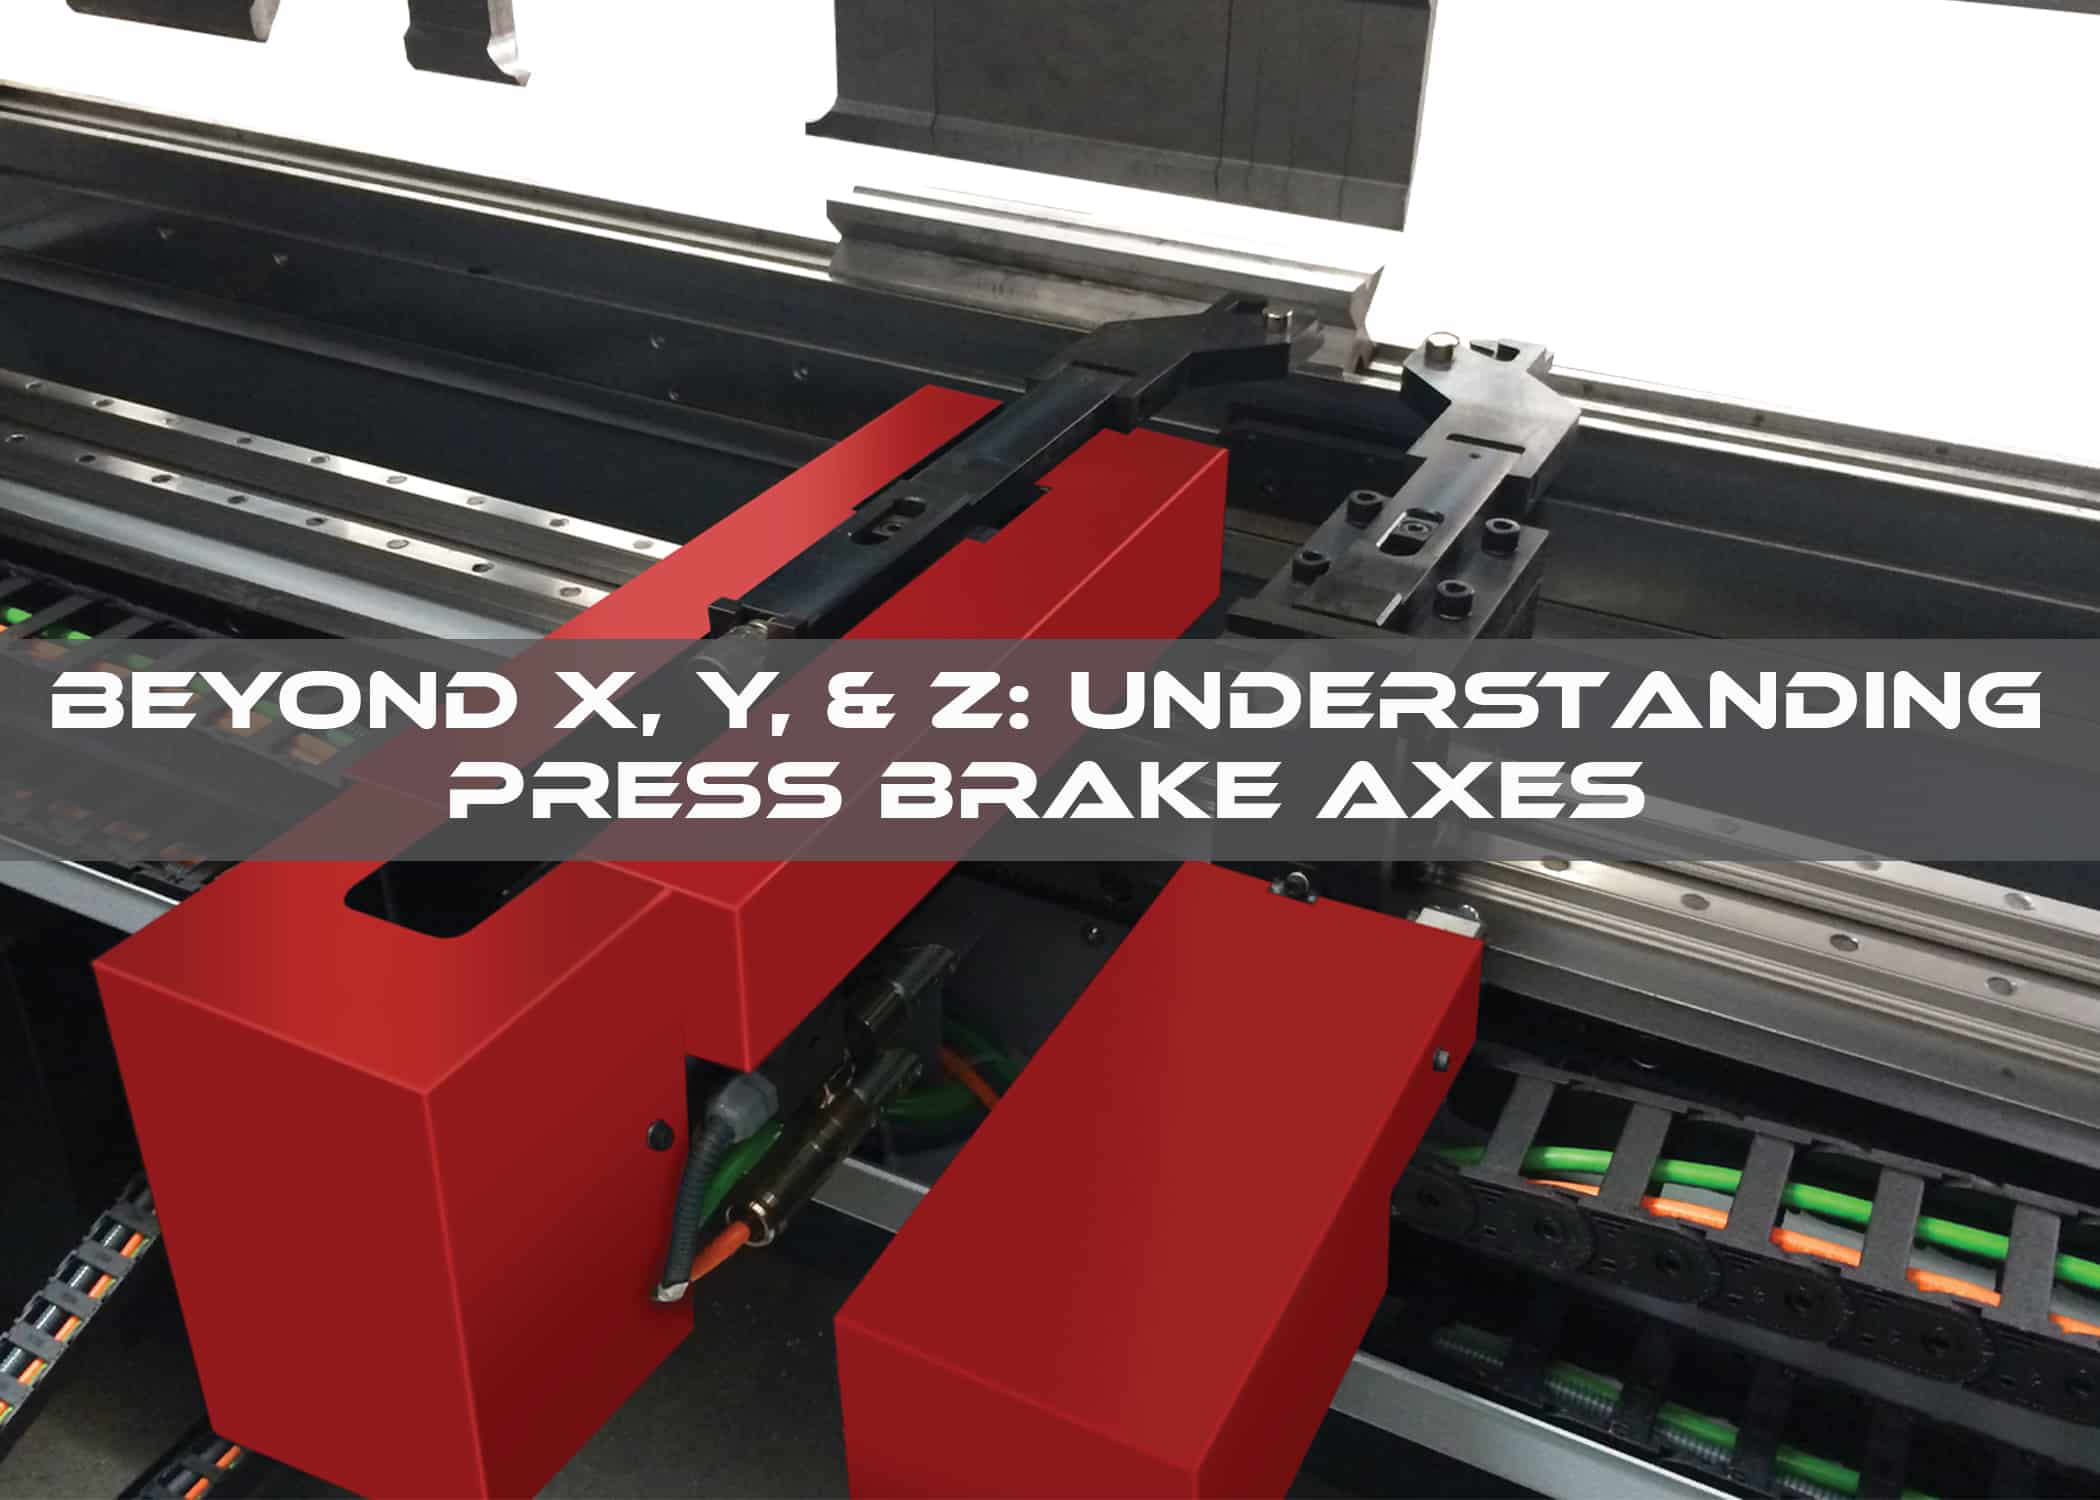 Beyond X, Y, and Z: Understanding Press Brake Axes